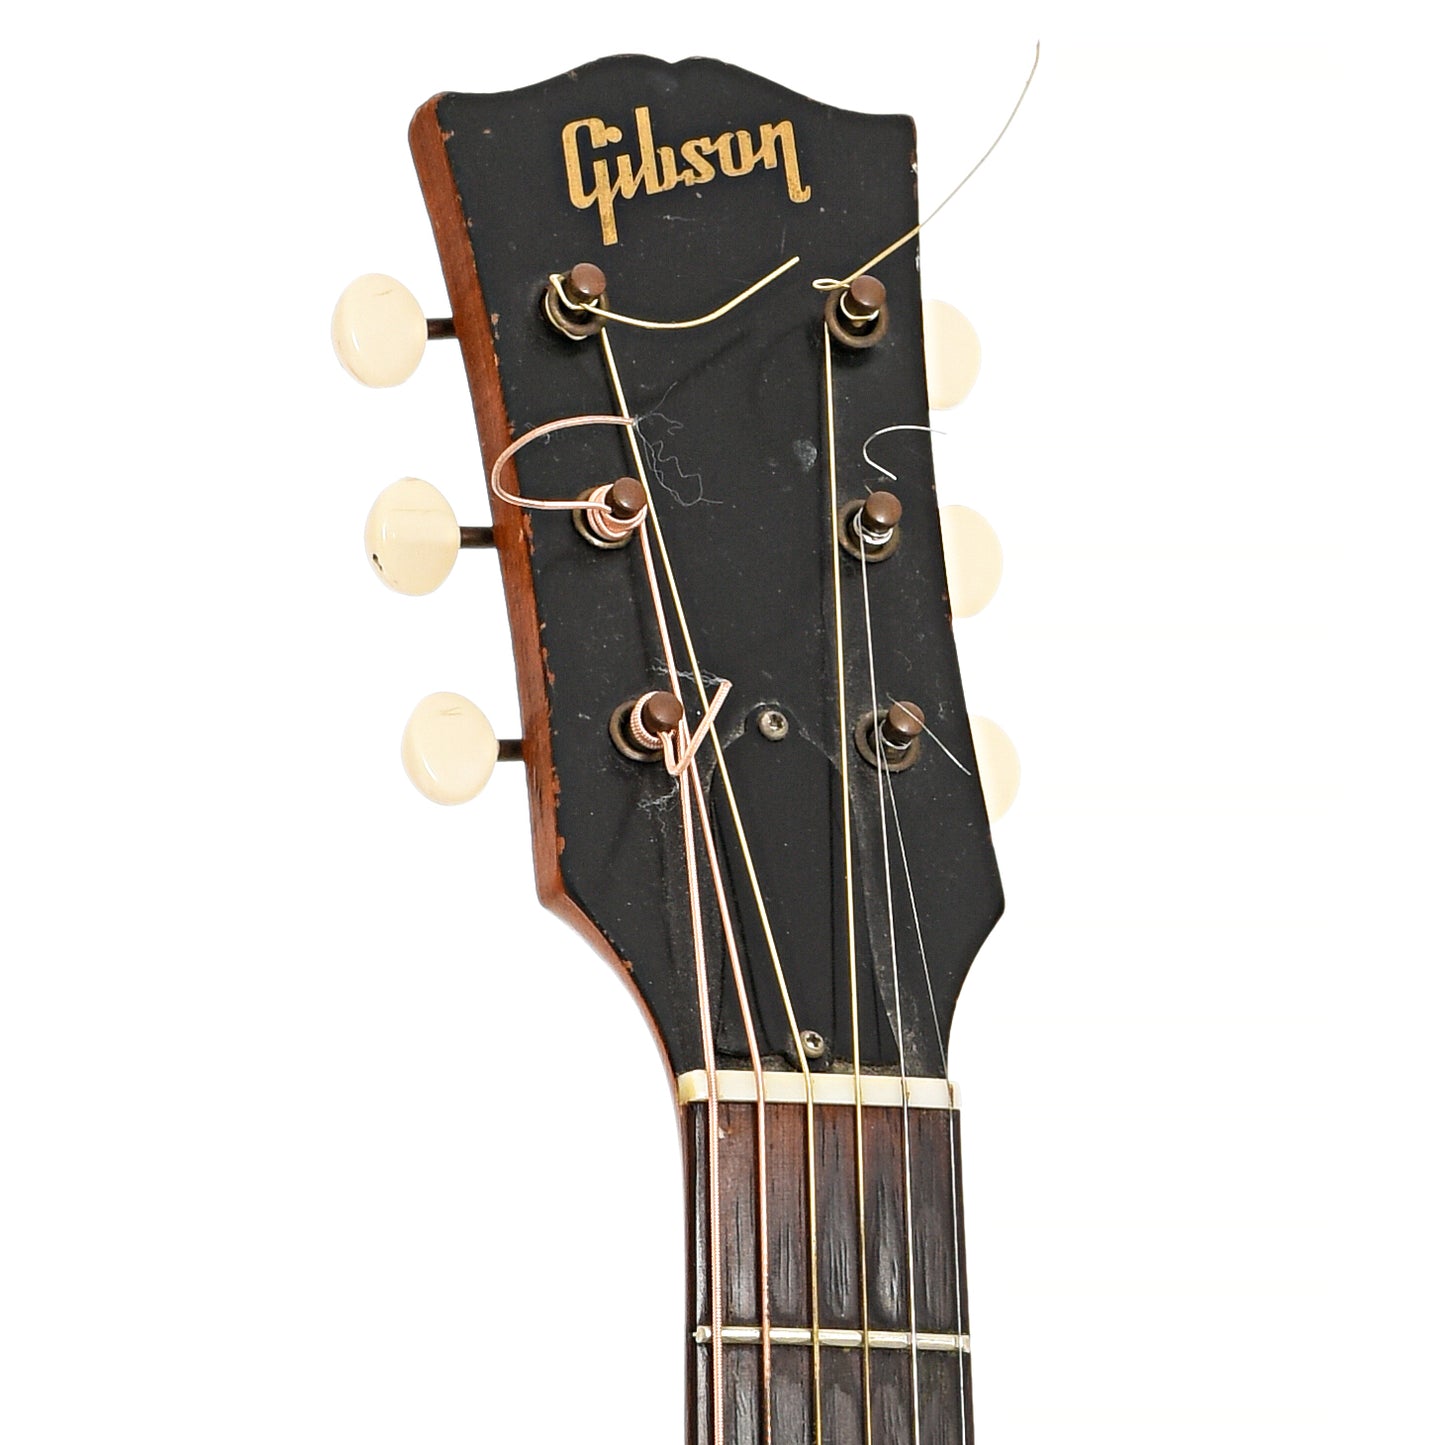 Front headstock of Gibson LG-0 Acoustic Guitar